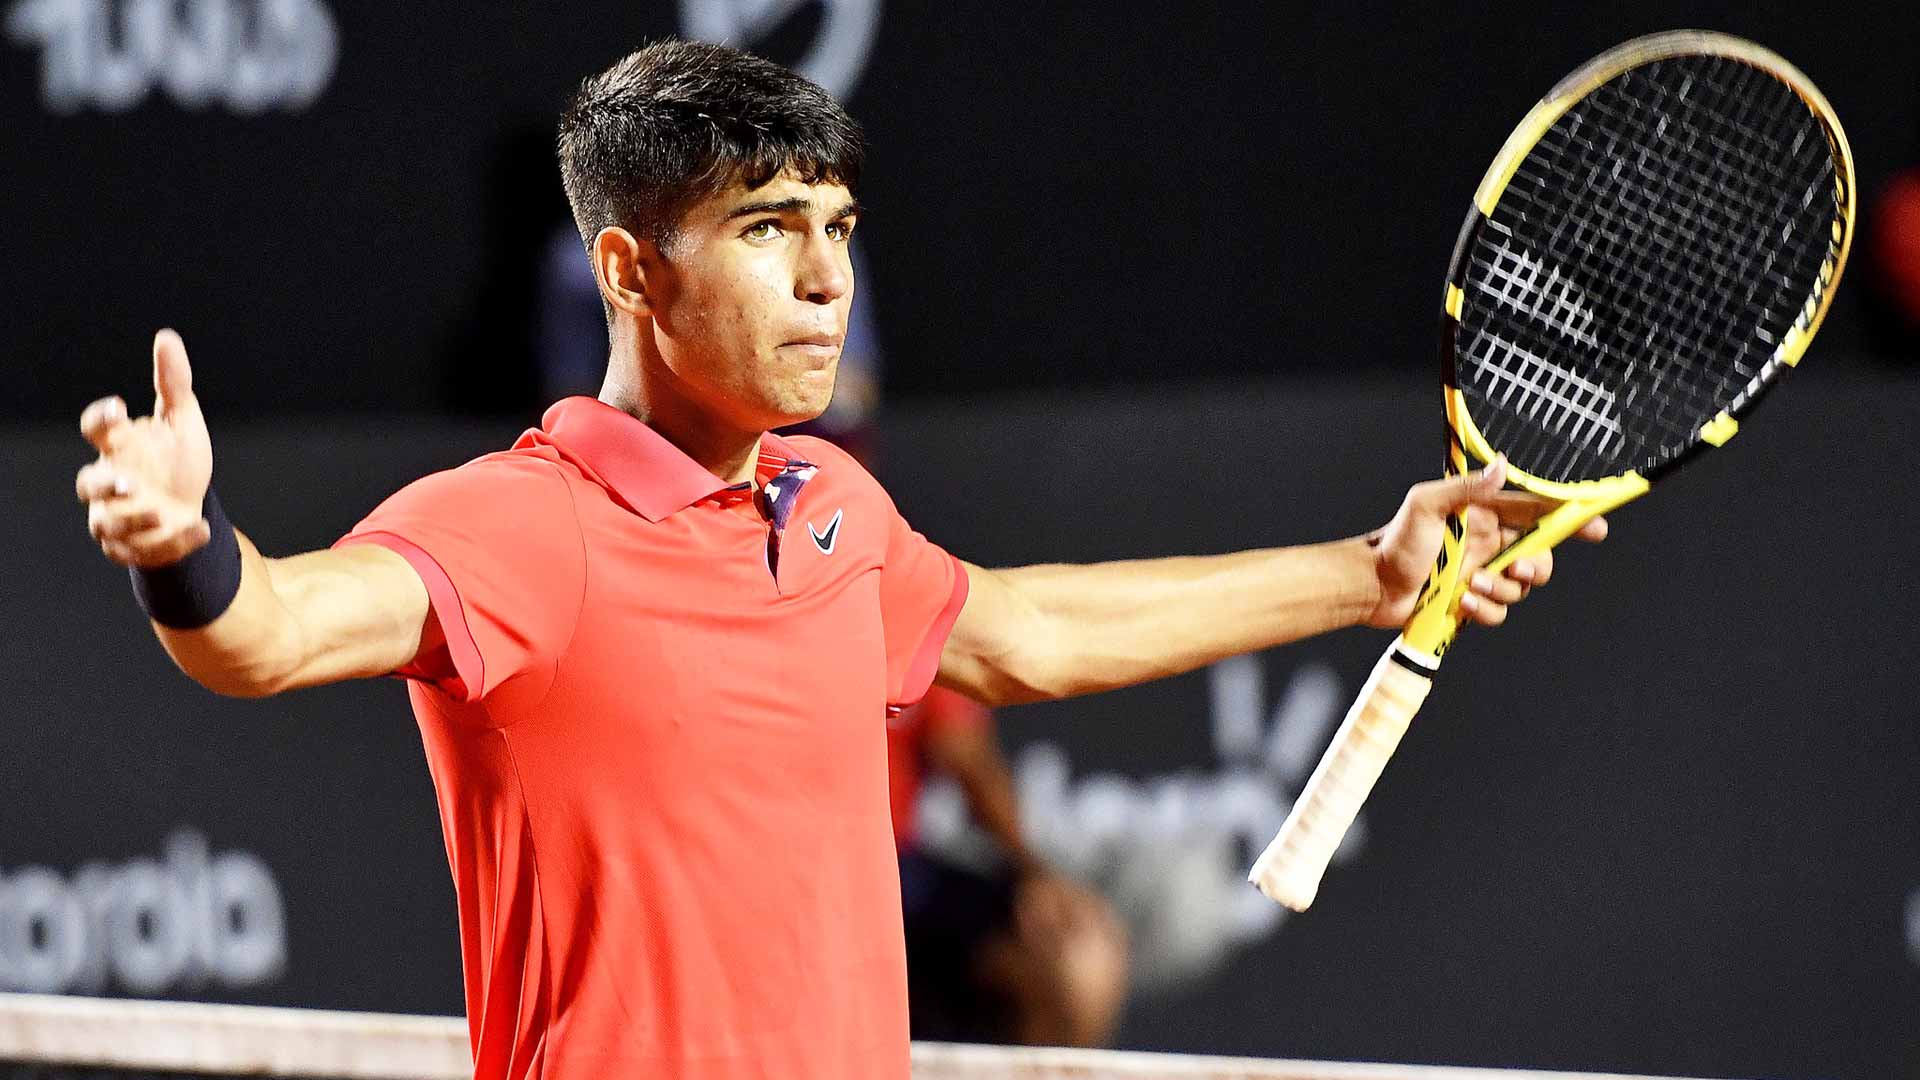 Carlos Alcaraz prevails in his ATP Tour debut at the Rio Open presented by Claro.